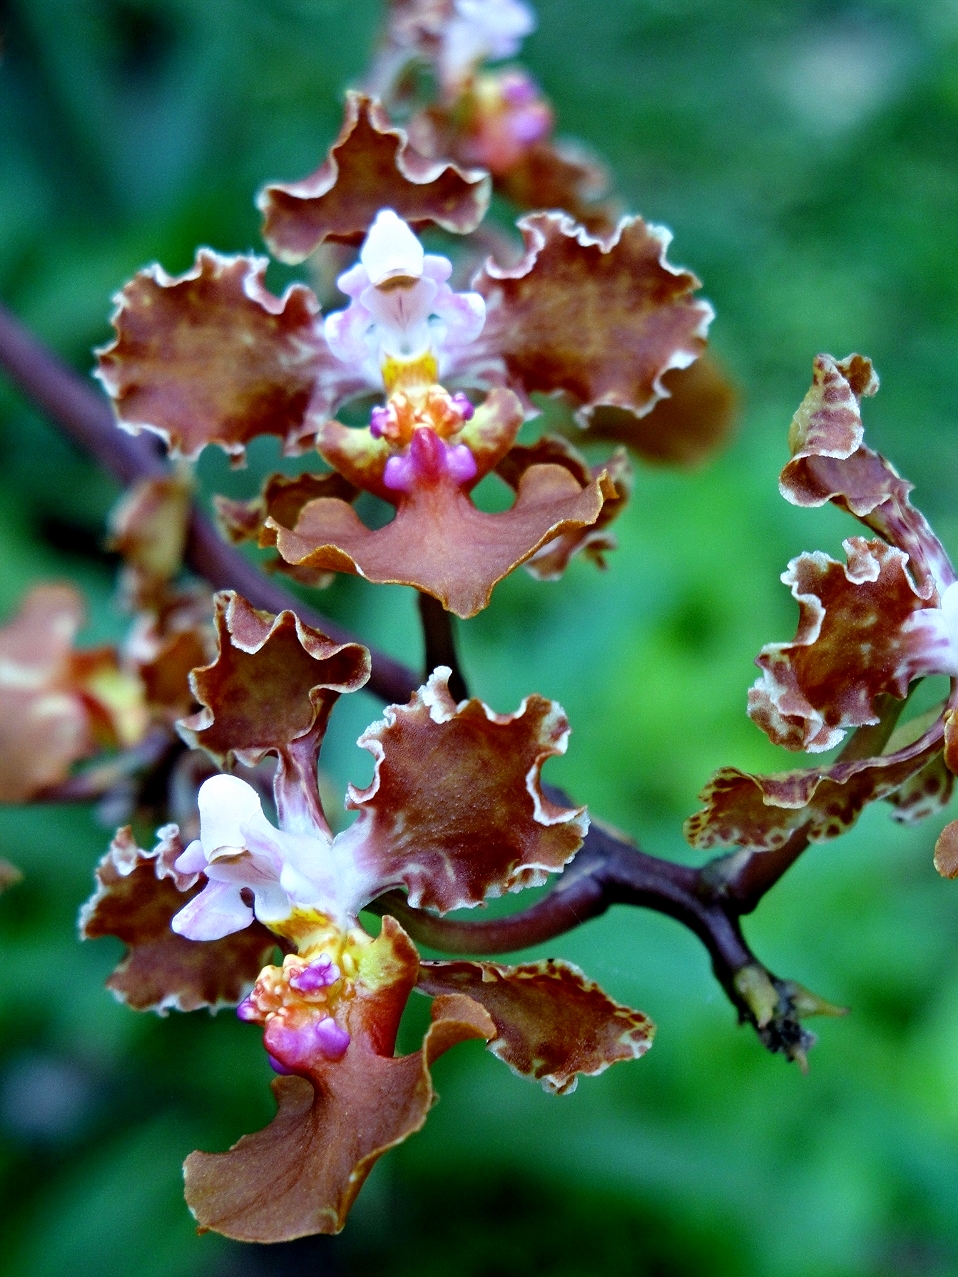 Belize Orchids - Belize Vacation Packages - SabreWing Travel - Photo by David Berg